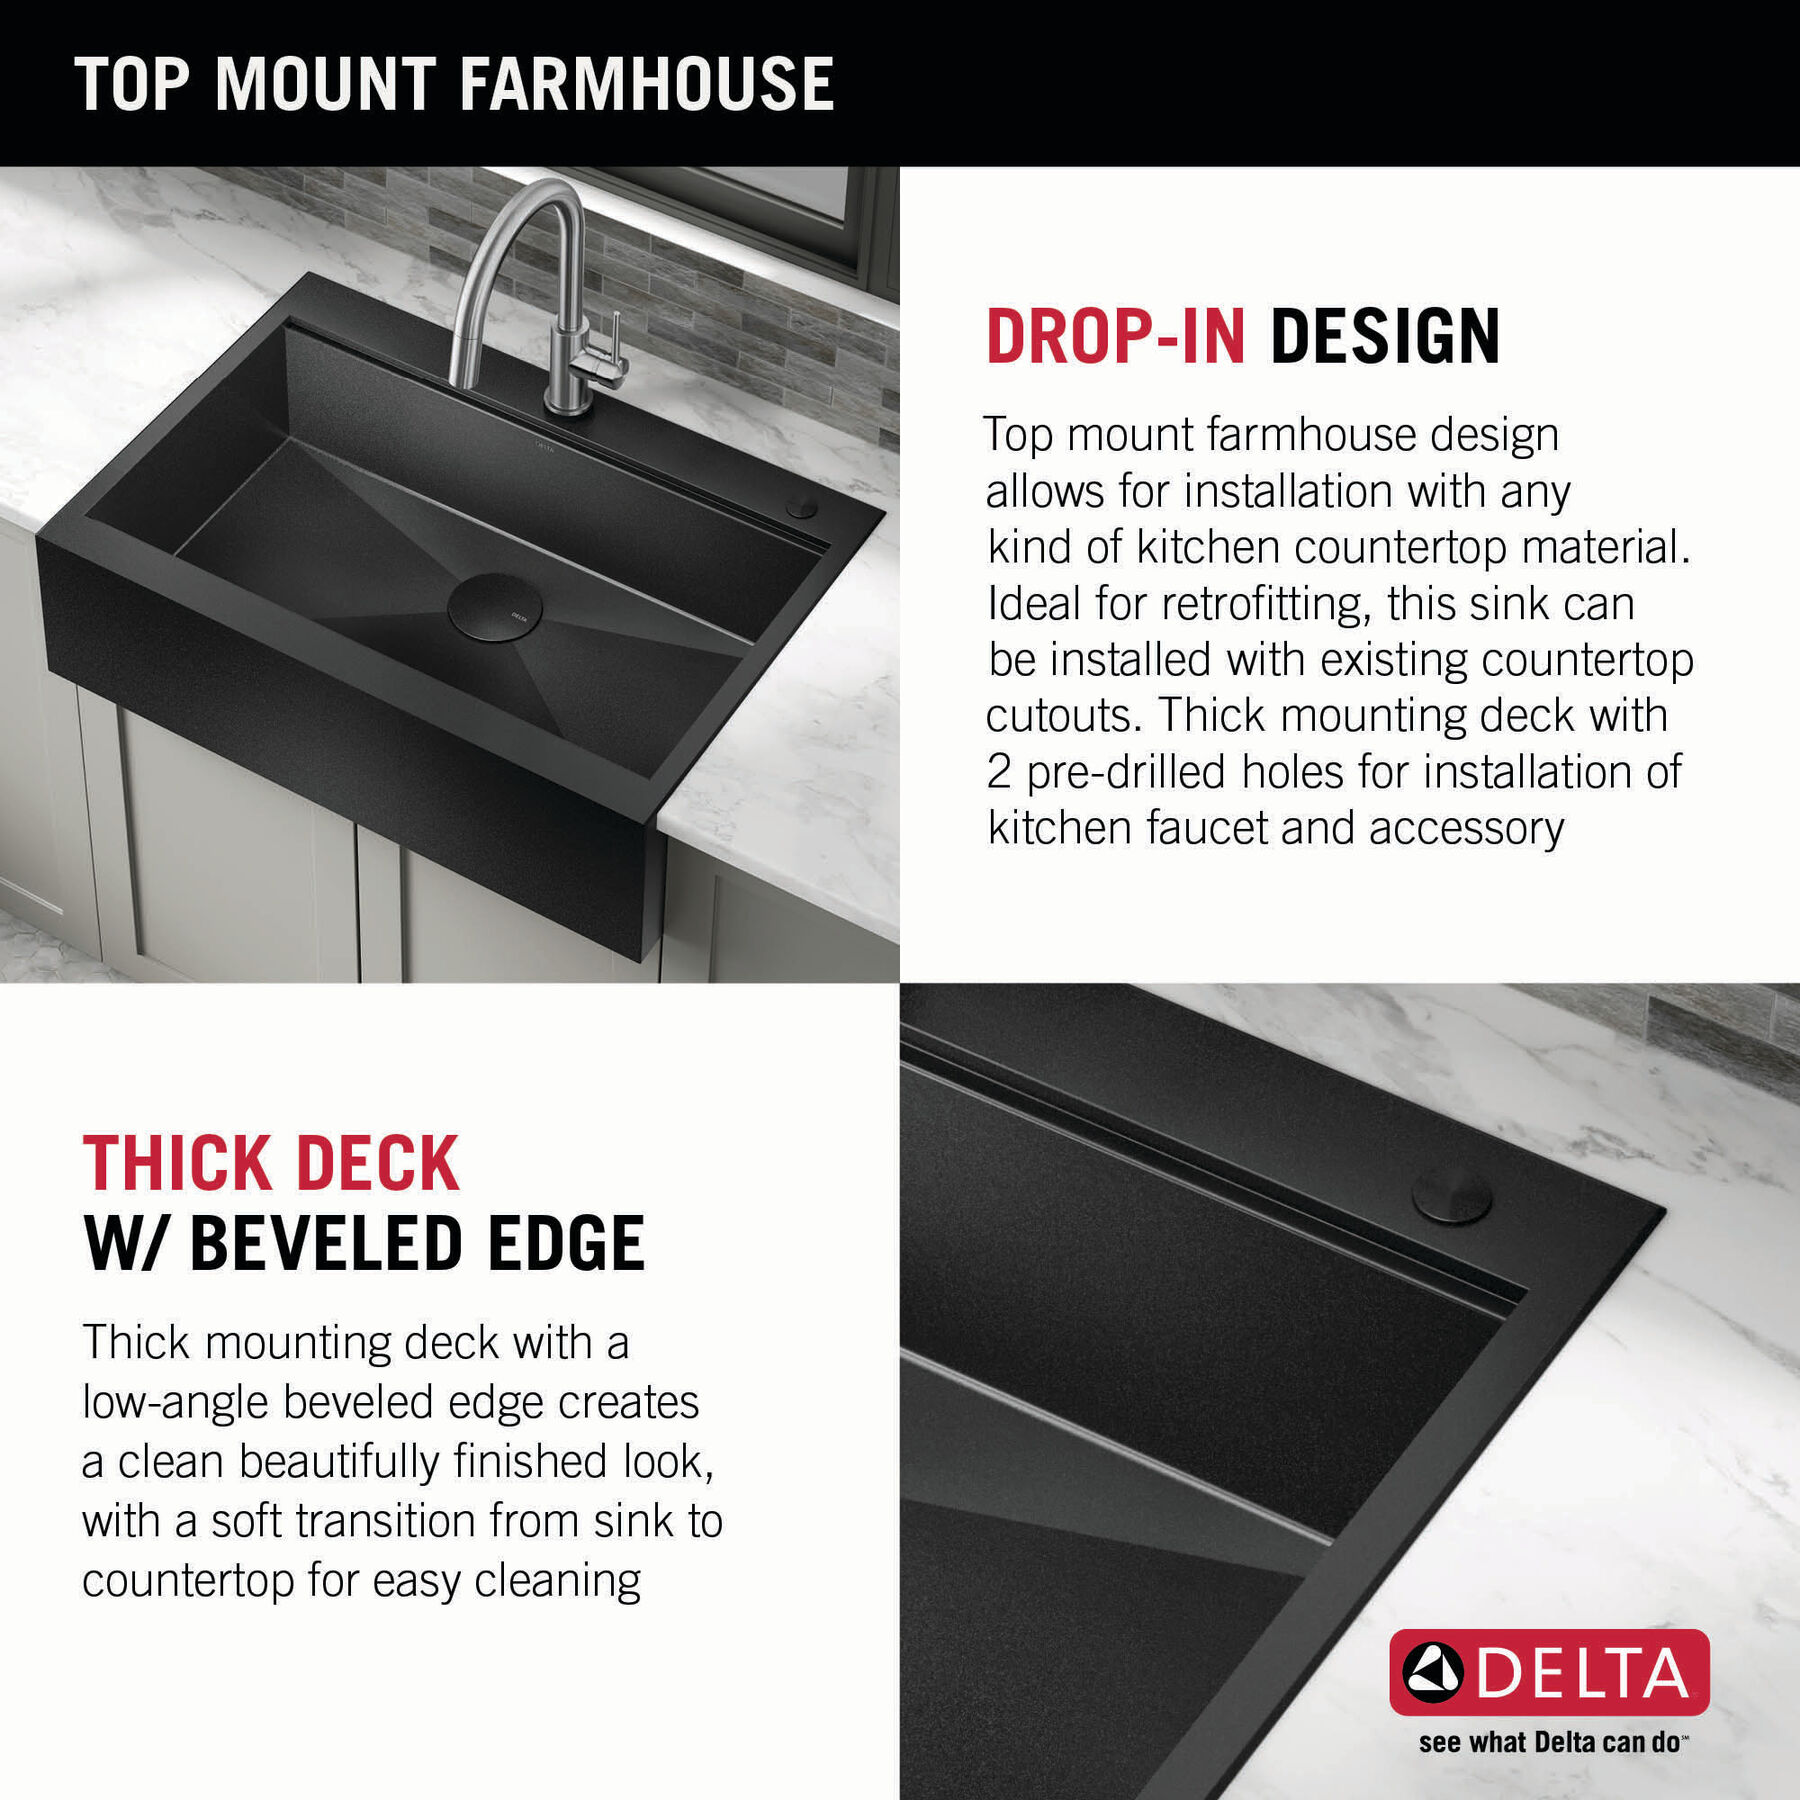 Kitchen Sink Black Stainless Steel Sink Washing, Draining and Cutting  3-in-1 Utility Sink Multi-functional Farmhouse sink with Kitchen Sink